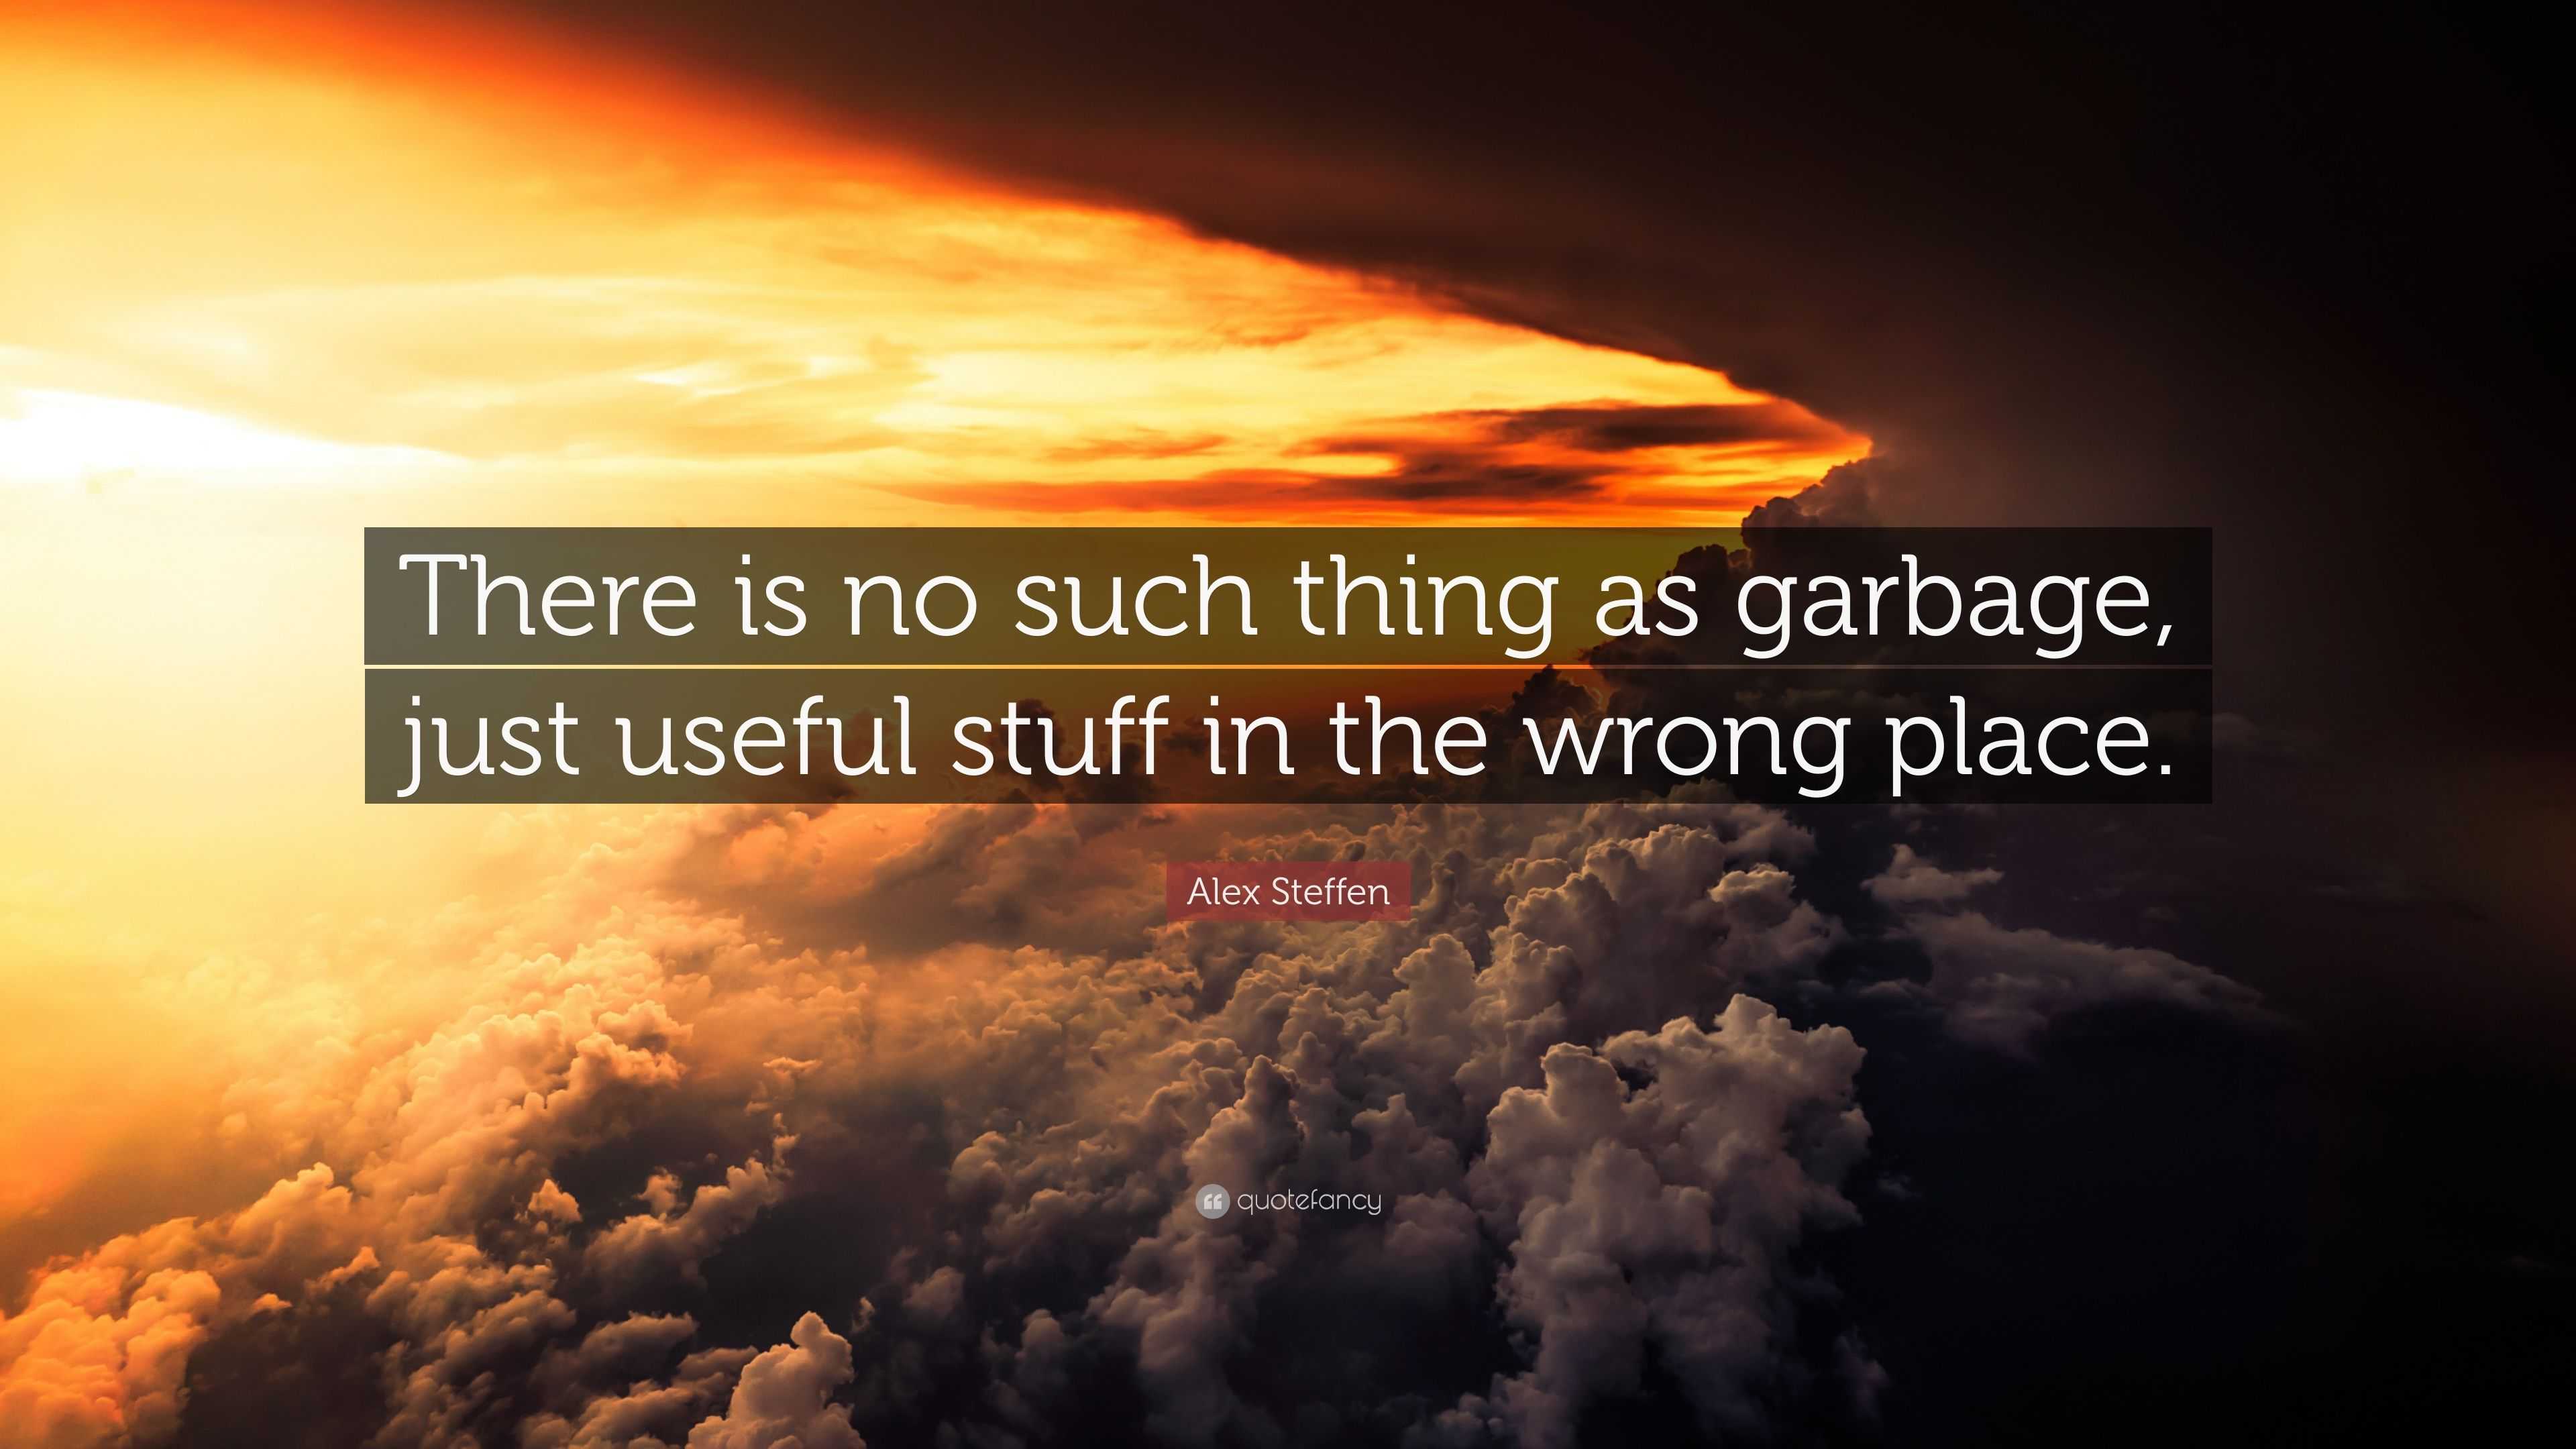 https://quotefancy.com/media/wallpaper/3840x2160/3382630-Alex-Steffen-Quote-There-is-no-such-thing-as-garbage-just-useful.jpg